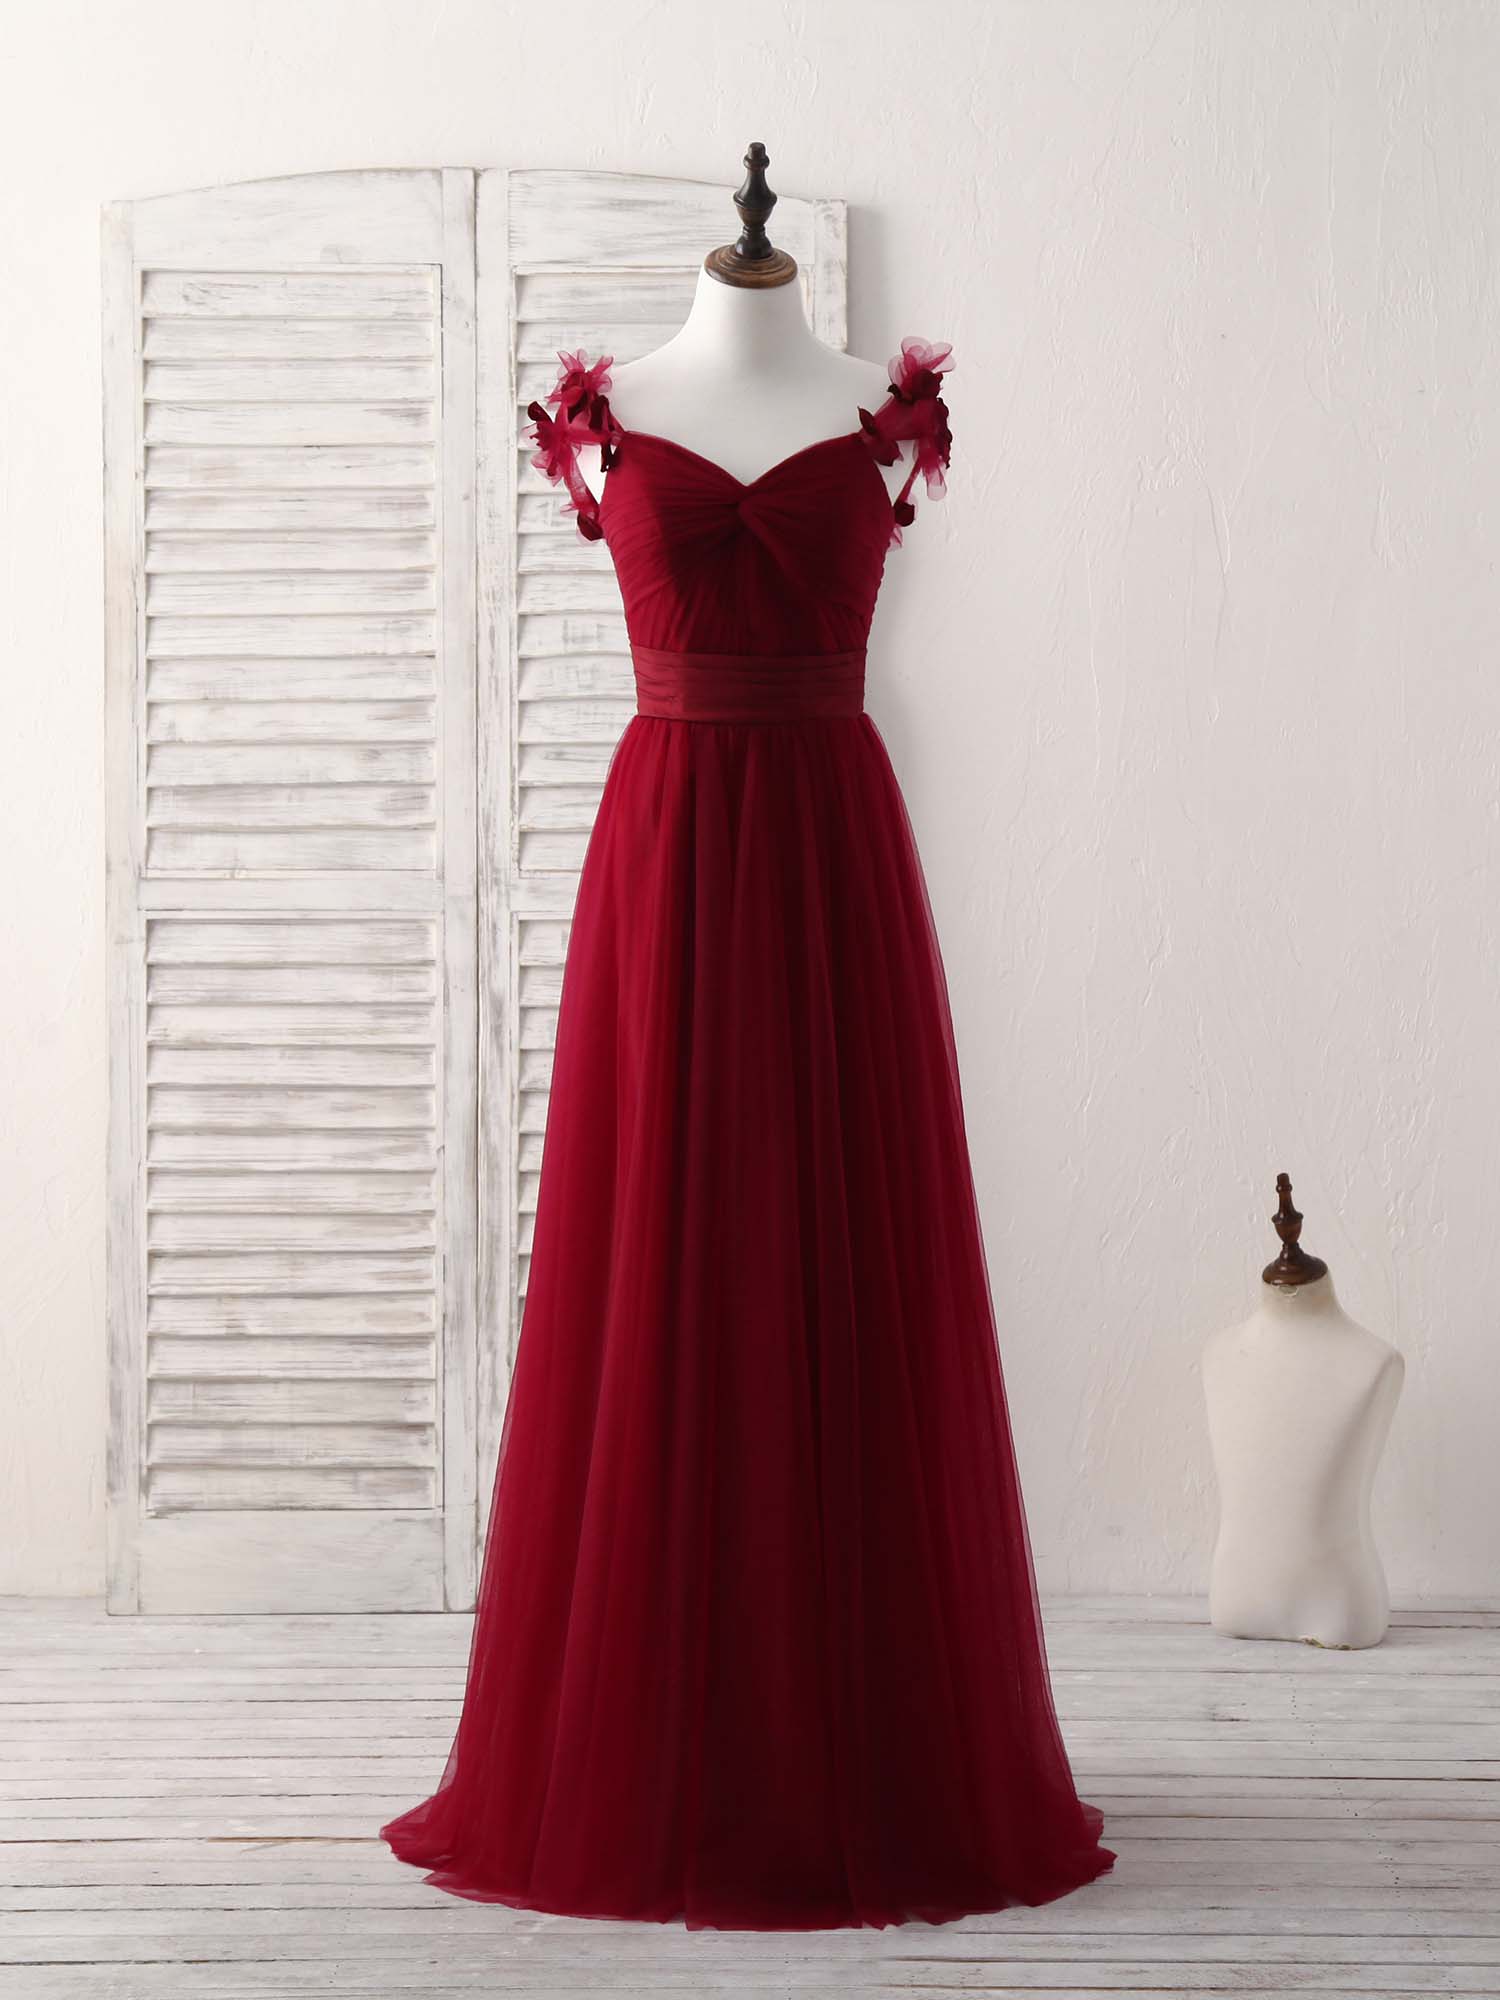 Simple Burgundy Tulle Long Corset Prom Dress Burgundy Corset Bridesmaid Dress outfit, Party Dress Wedding Guest Dress